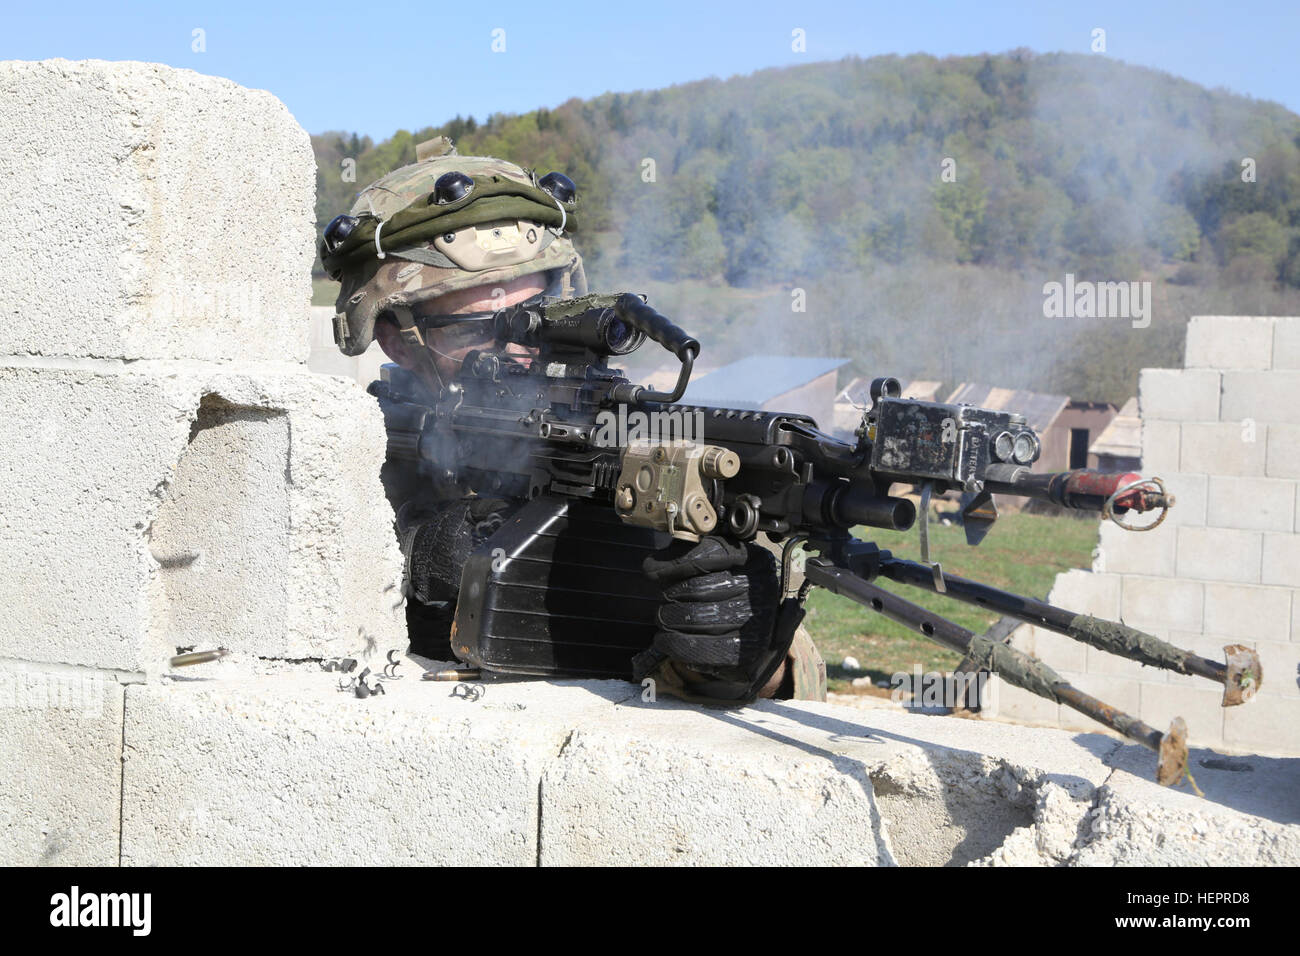 A U.S. Soldier of 1st Battalion, 503rd Infantry Regiment, 173rd Airborne Brigade returns small arms fire while clearing a town during exercise Saber Junction 16 at the U.S. Army’s Joint Multinational Readiness Center (JMRC) in Hohenfels, Germany, April 20, 2016. Saber Junction 16 is the U.S. Army Europe’s 173rd Airborne Brigade’s combat training center certification exercise, taking place at the JMRC in Hohenfels, Germany, Mar. 31-Apr. 24, 2016.  The exercise is designed to evaluate the readiness of the Army’s Europe-based combat brigades to conduct unified land operations and promote interope Stock Photo